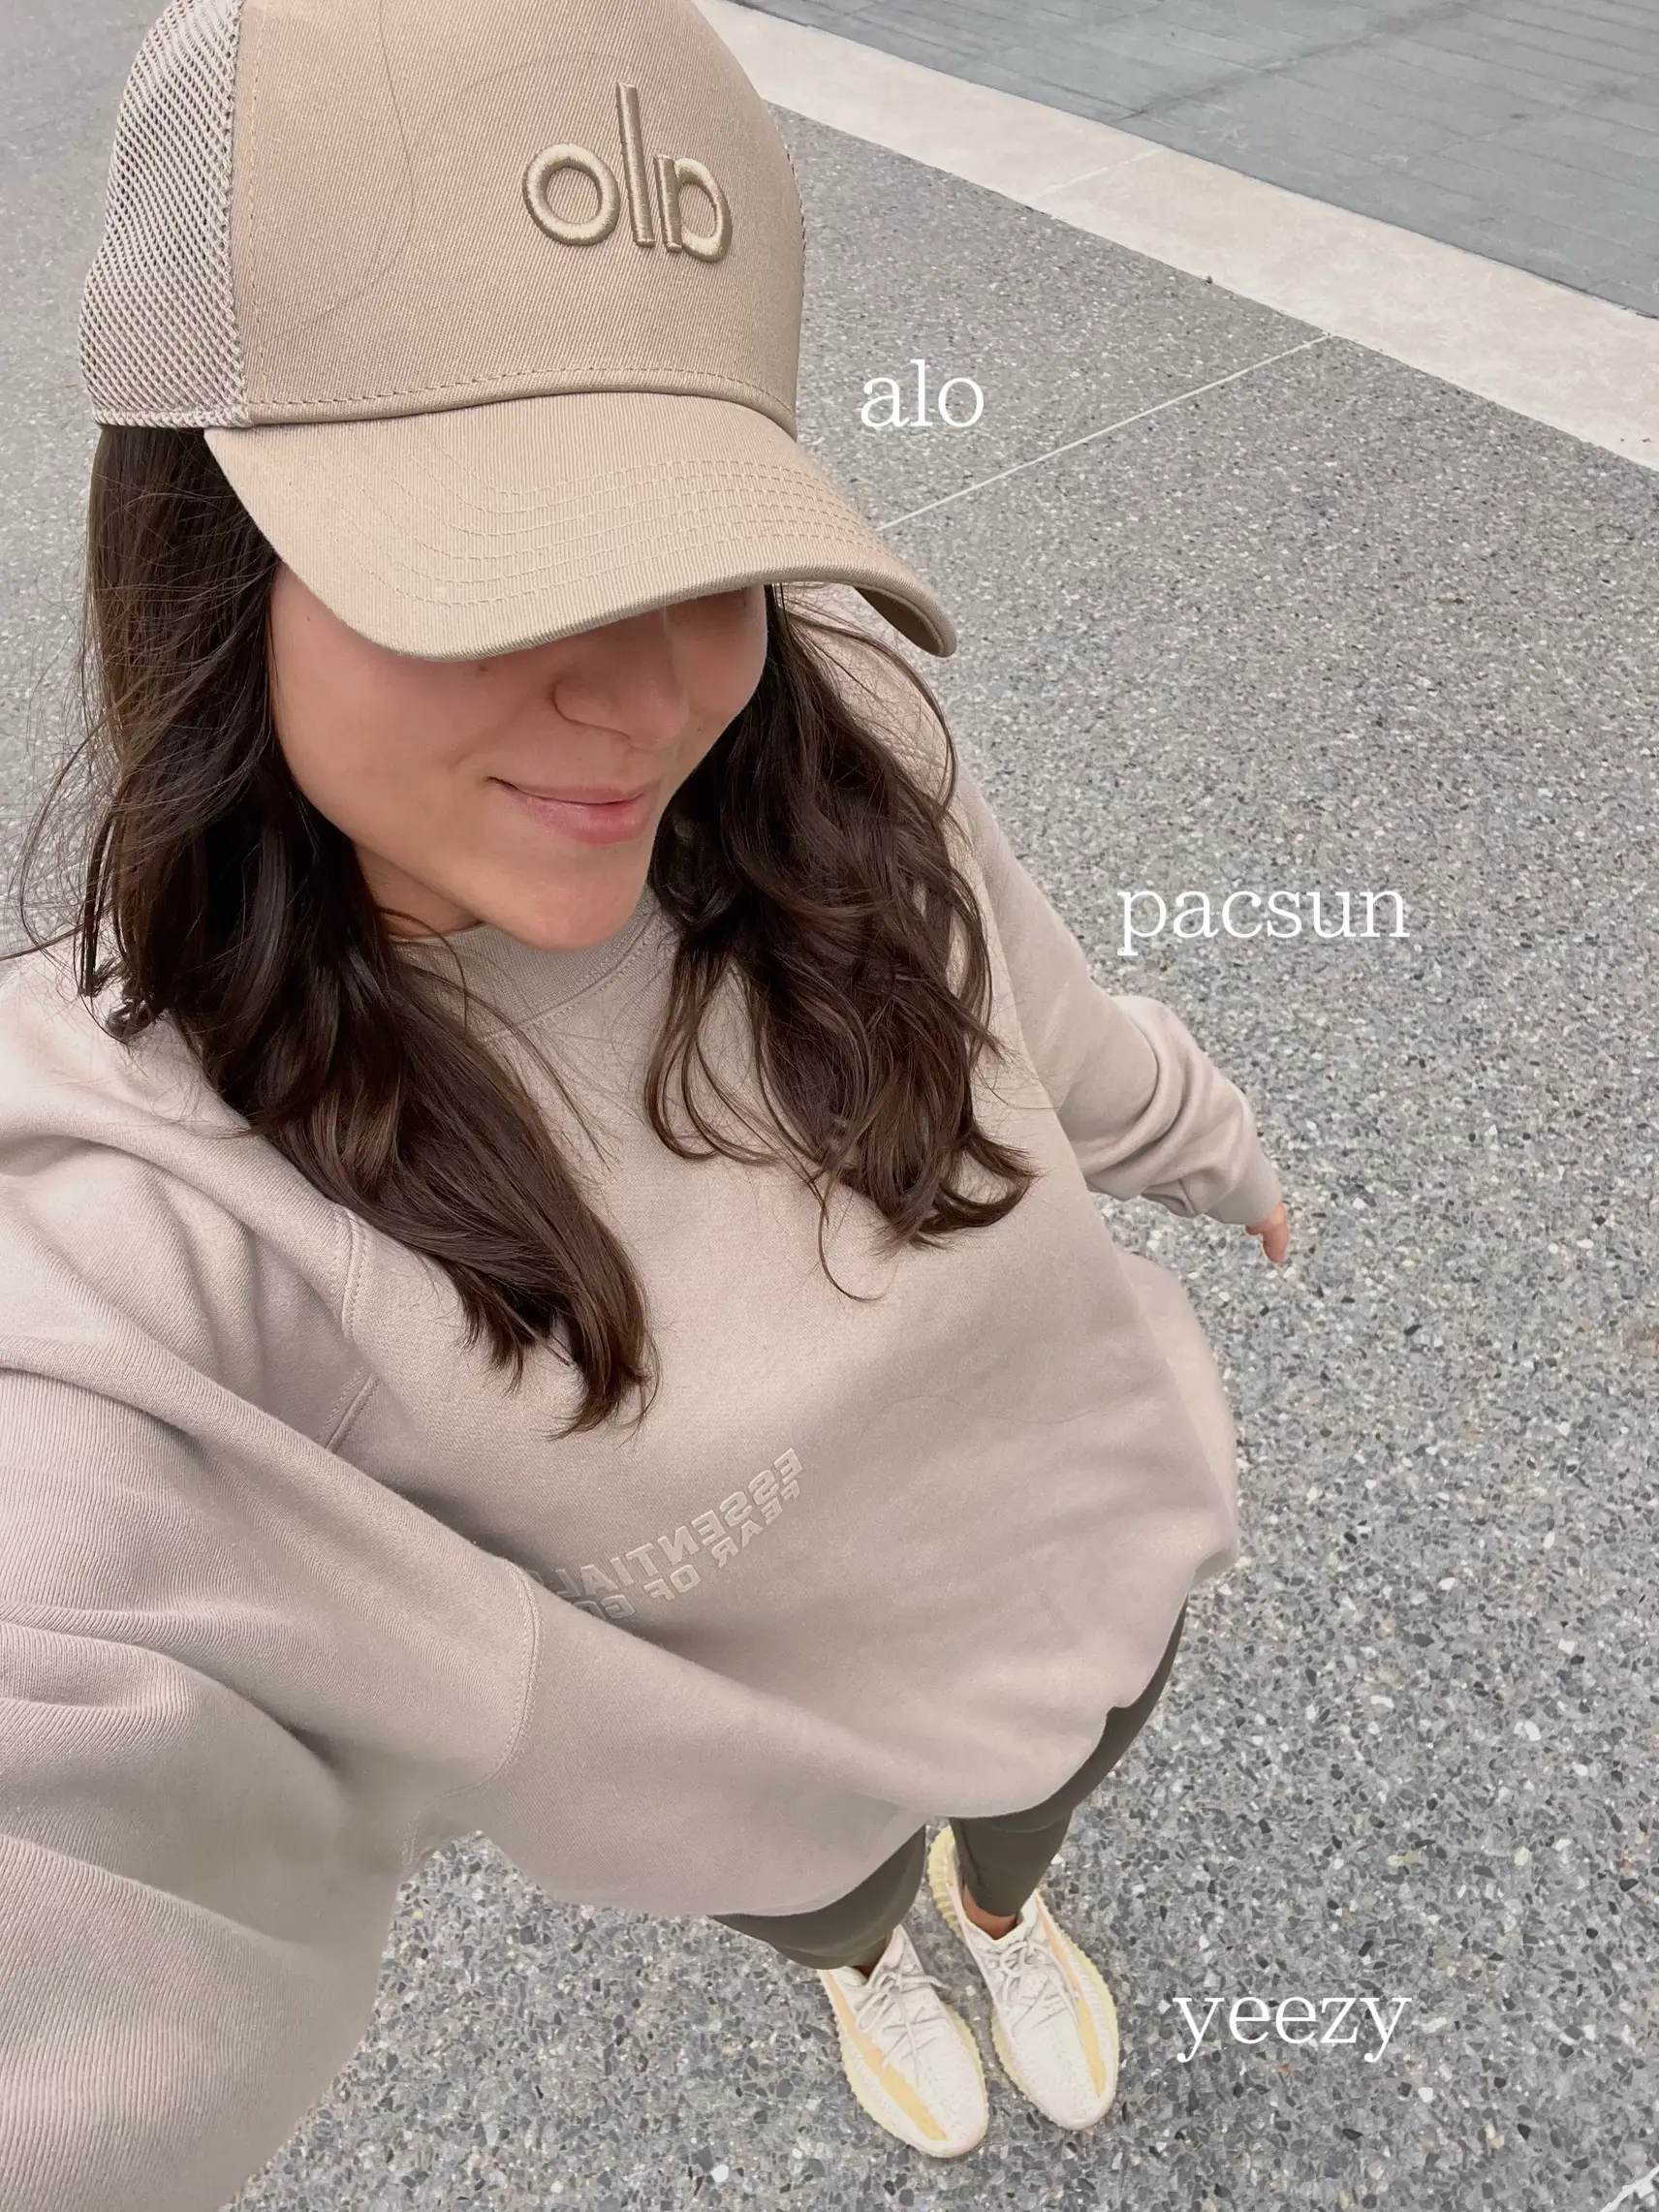 Alo Yoga Muse Hoodie worn by Olivia Flowers as seen in Southern